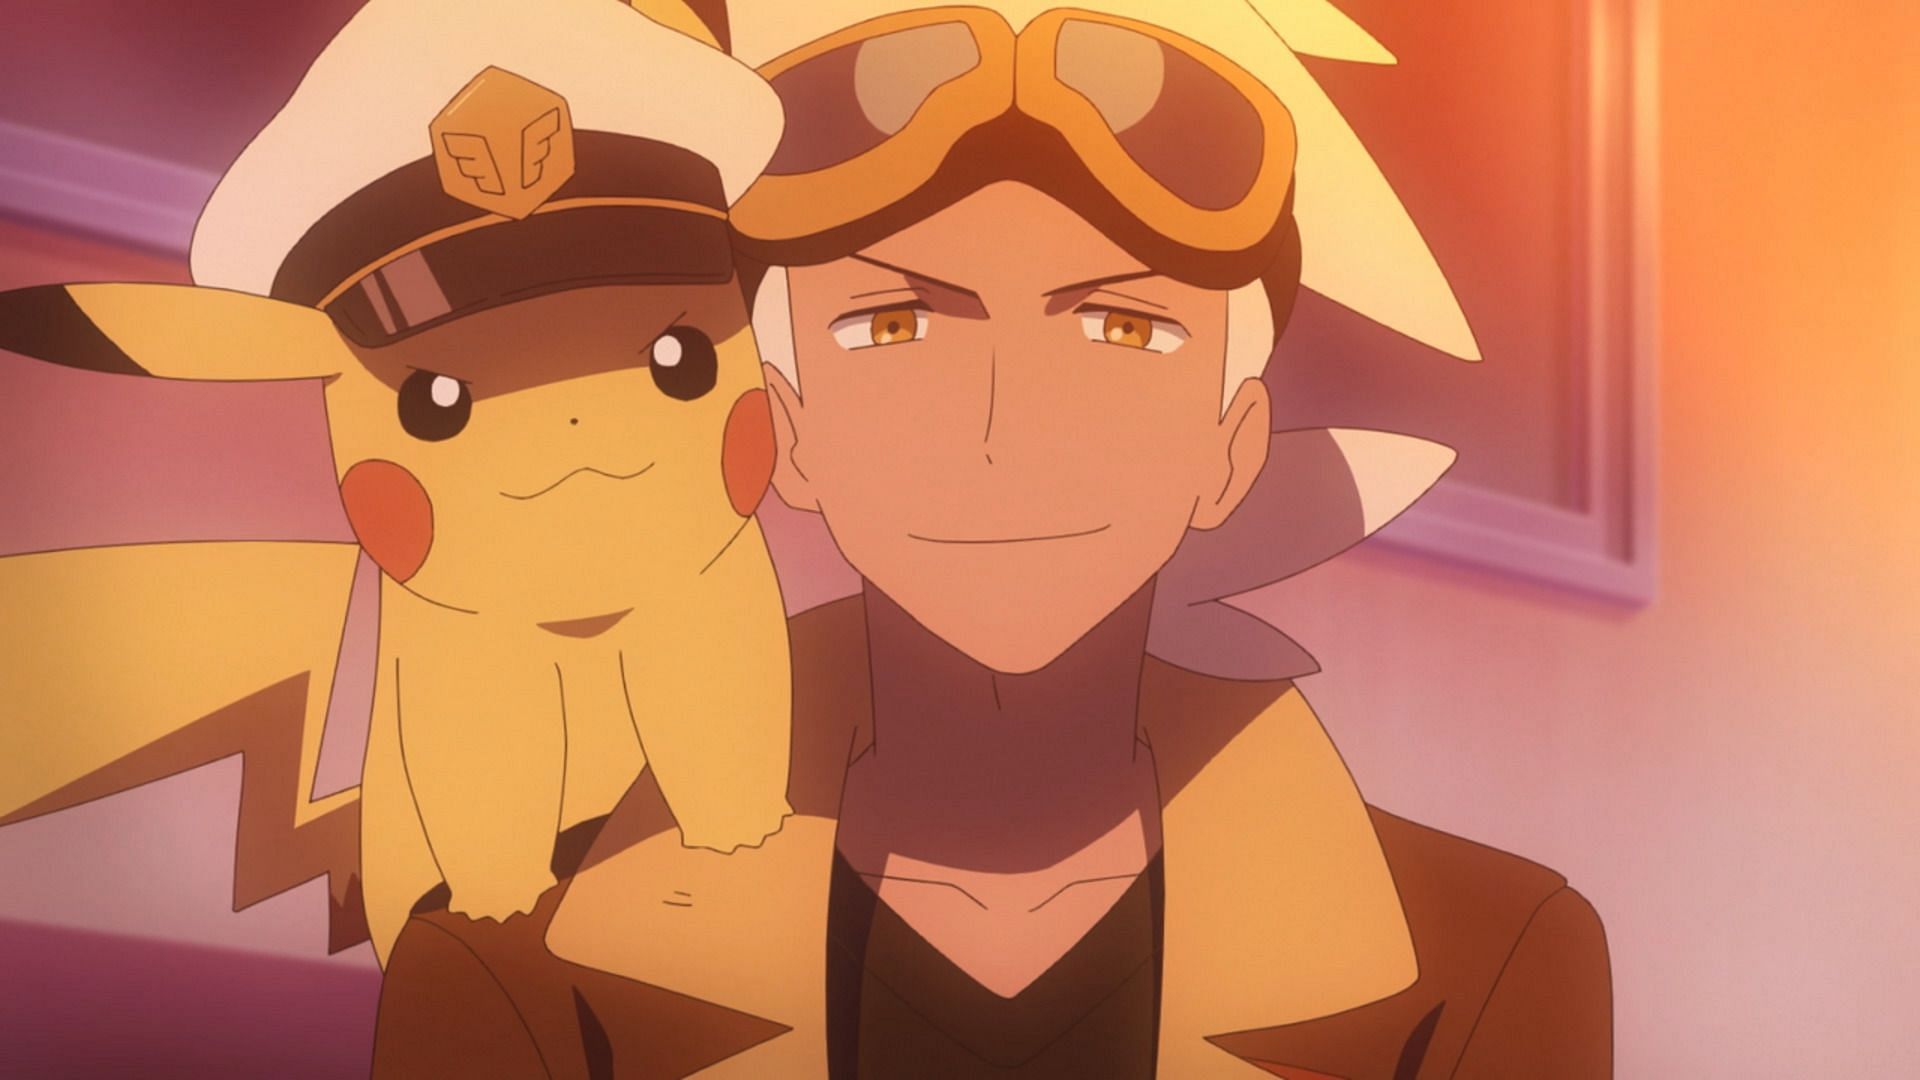 Captain Pikachu as seen in the anime